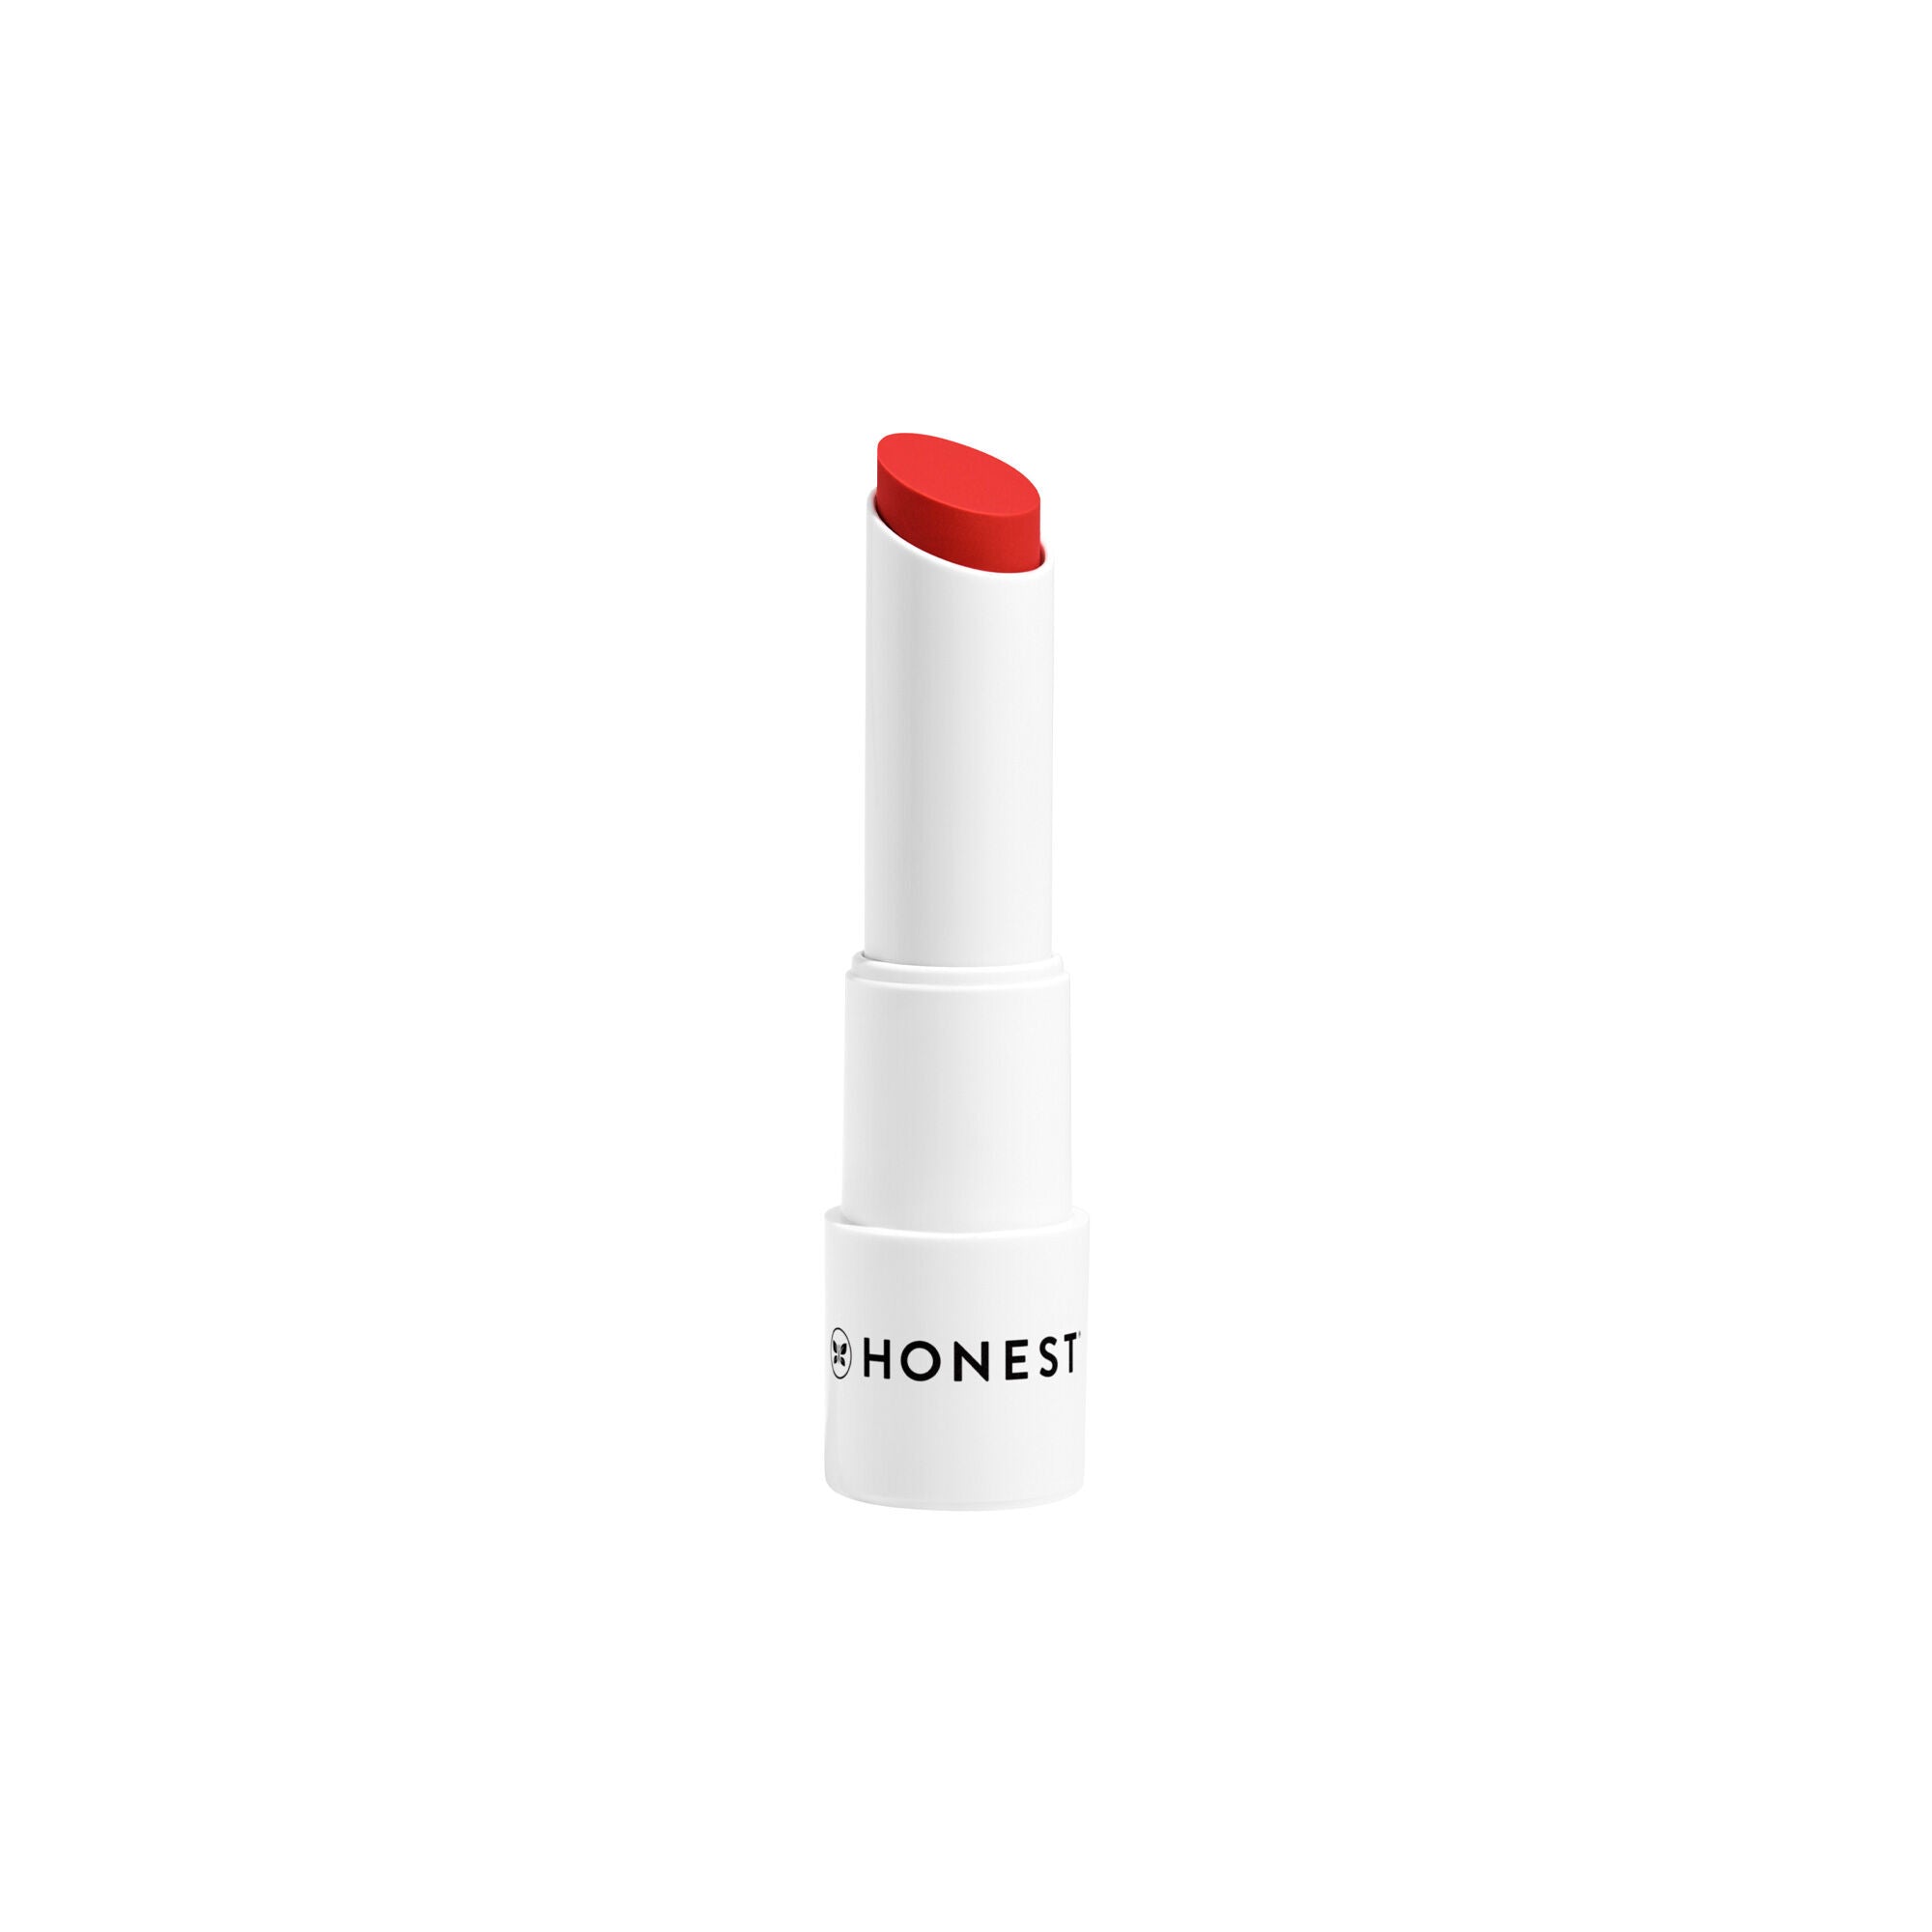 White lipstick tube with red lipstick tip.